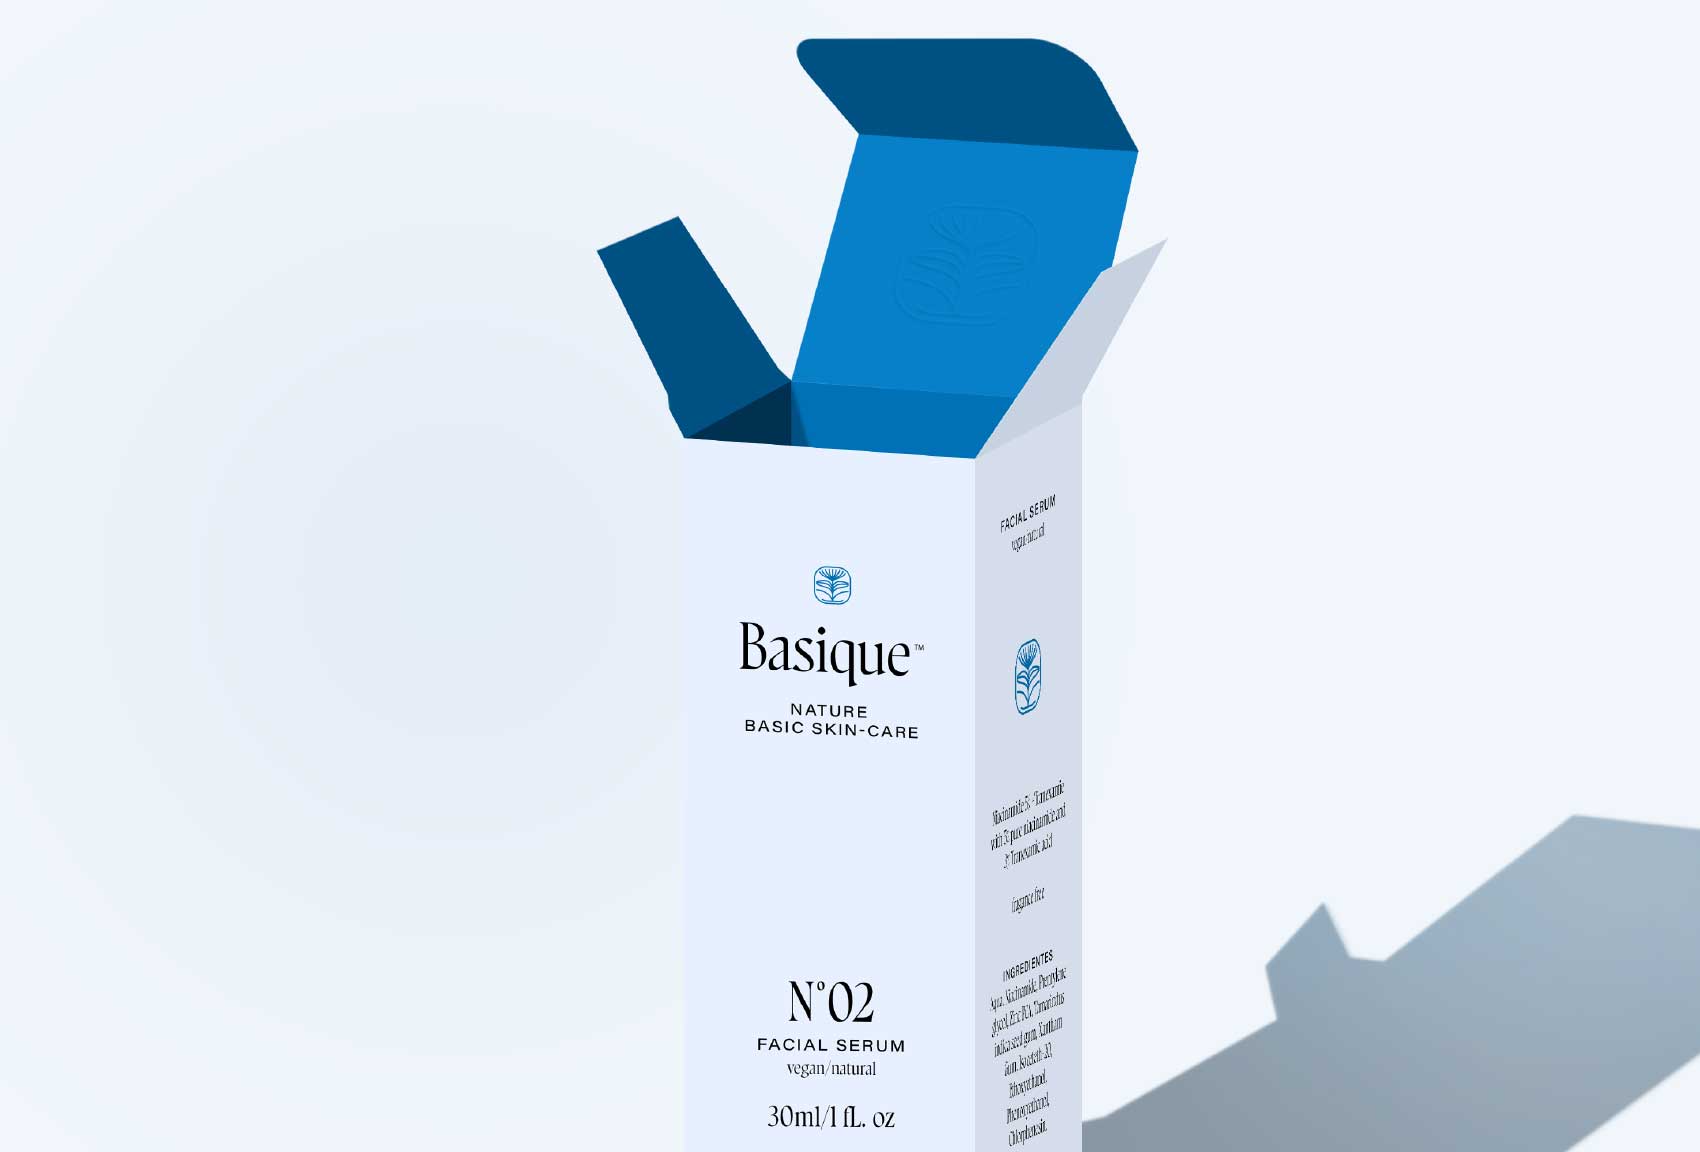 Brand Design, Visual Identity and Packaging for Basique Skin-Care